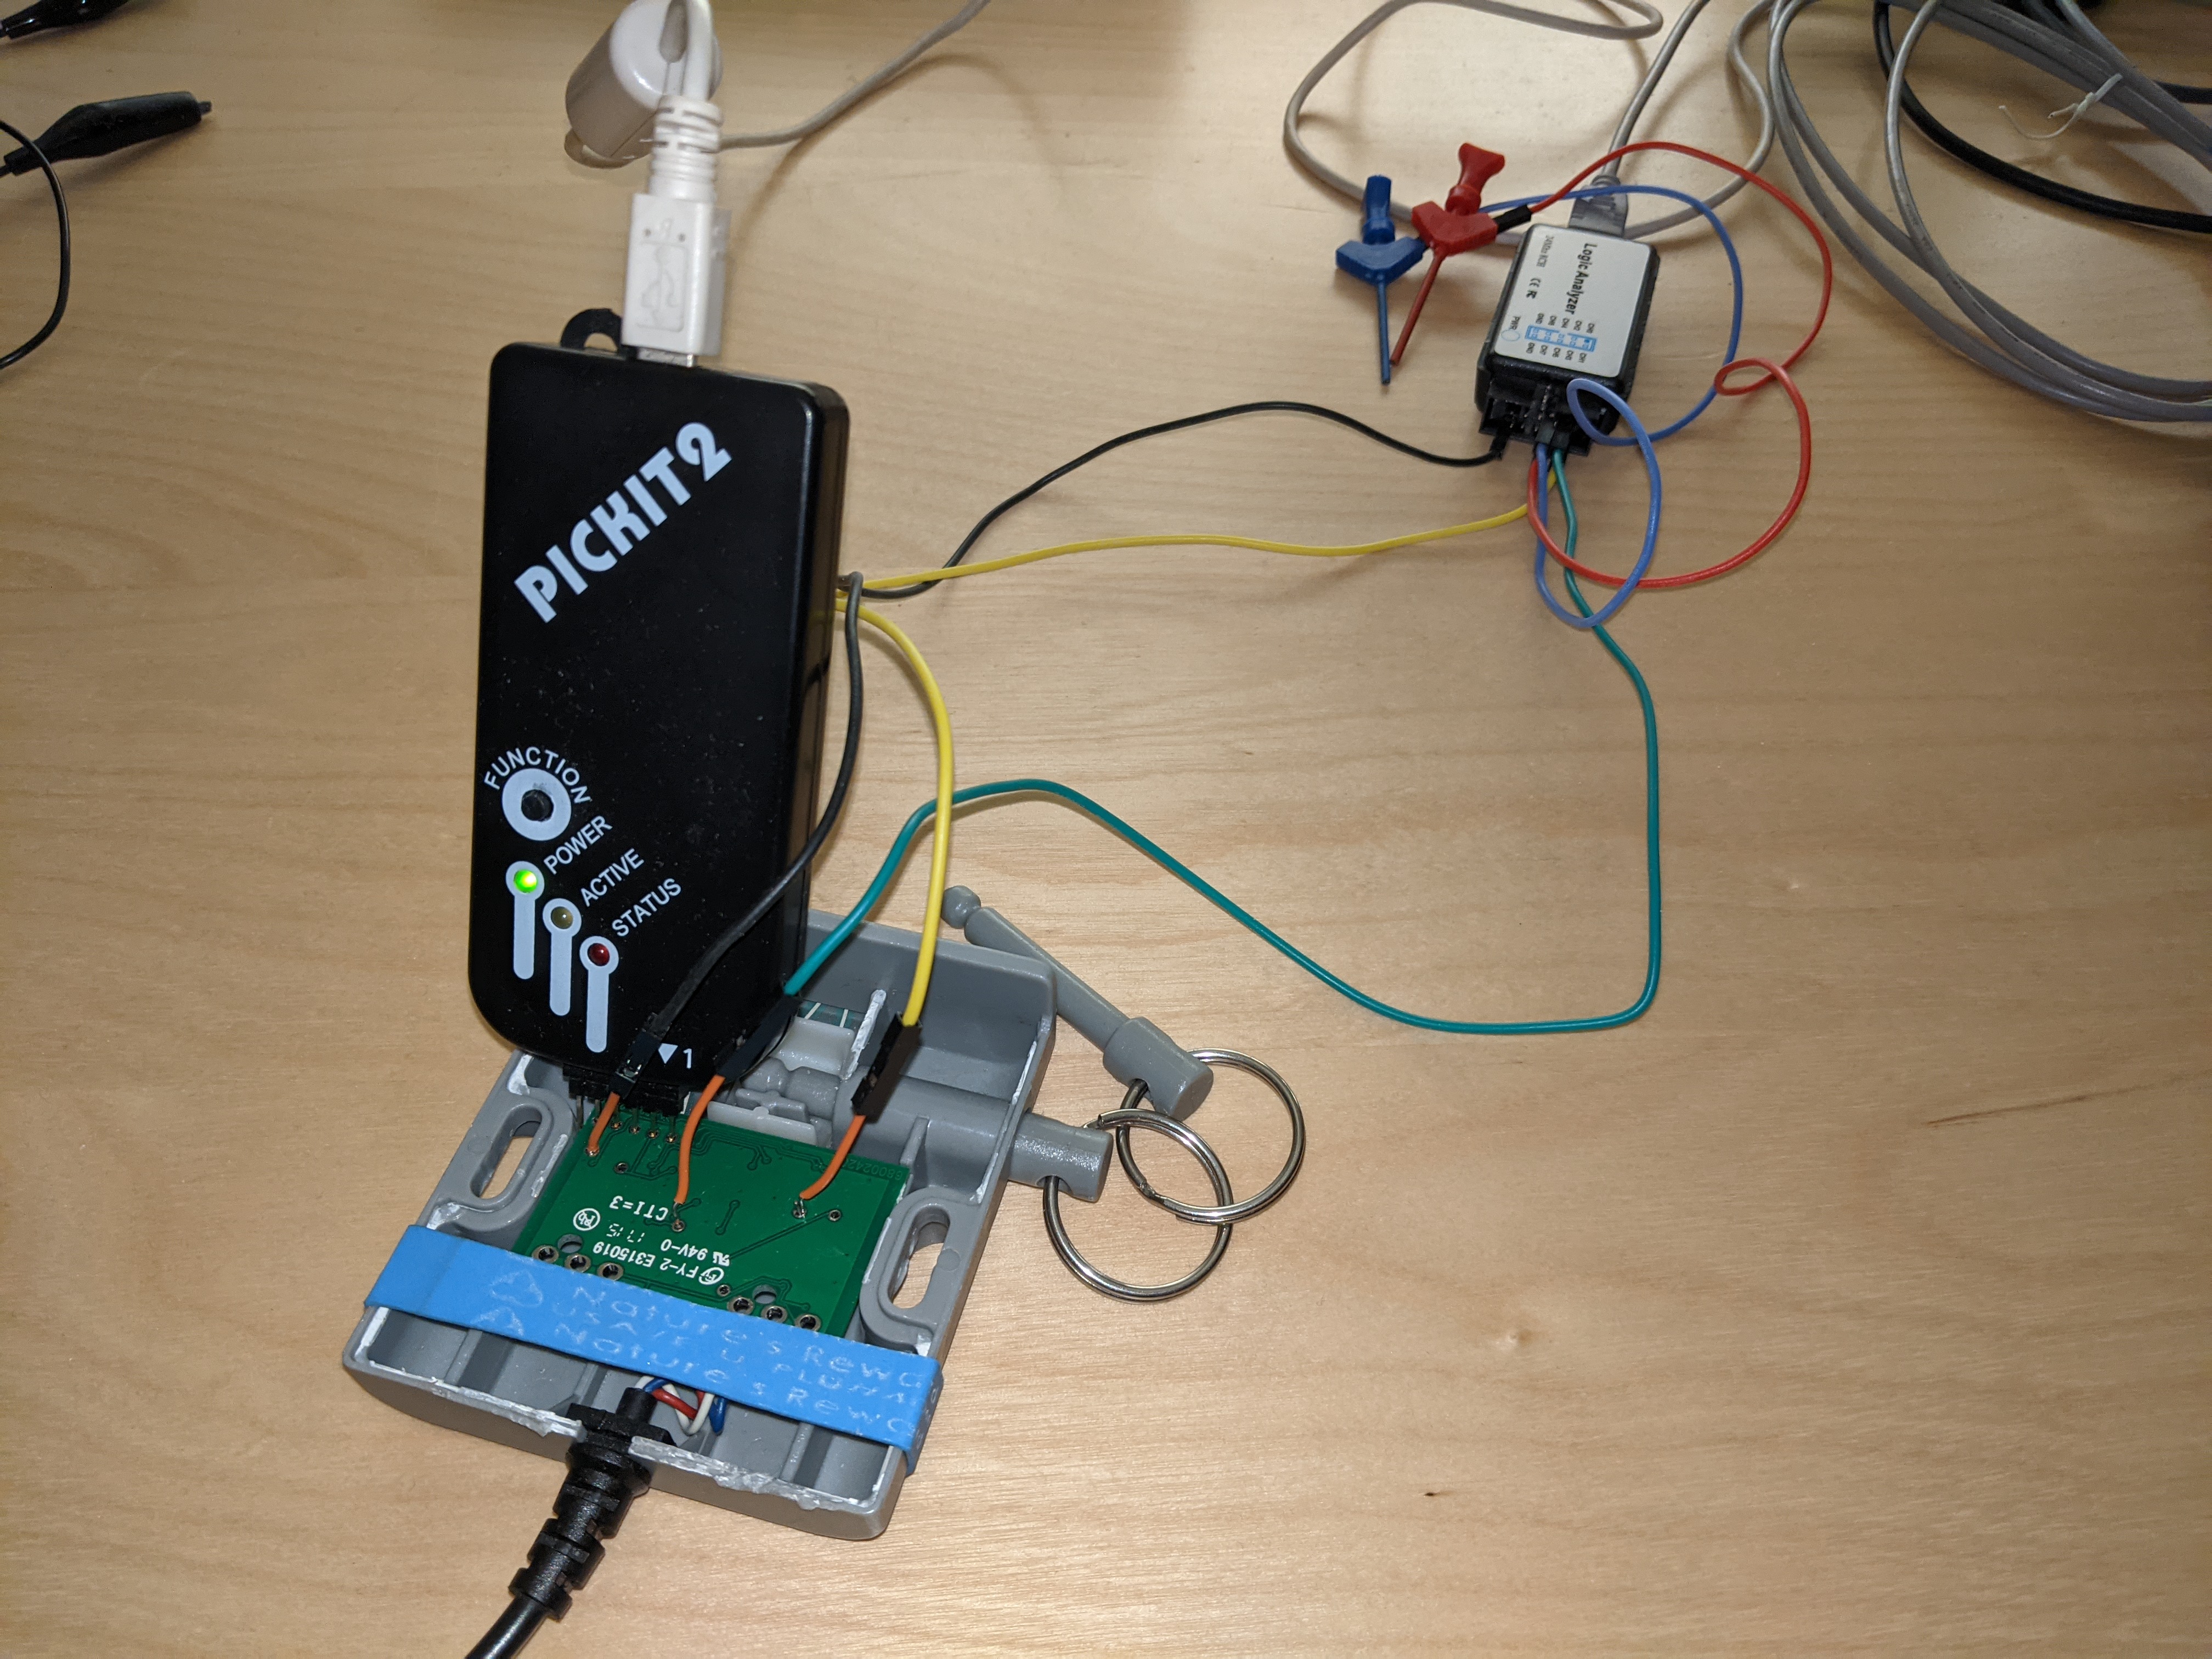 PIC programmer and logic analyzer connected to OEM BEKANT control board